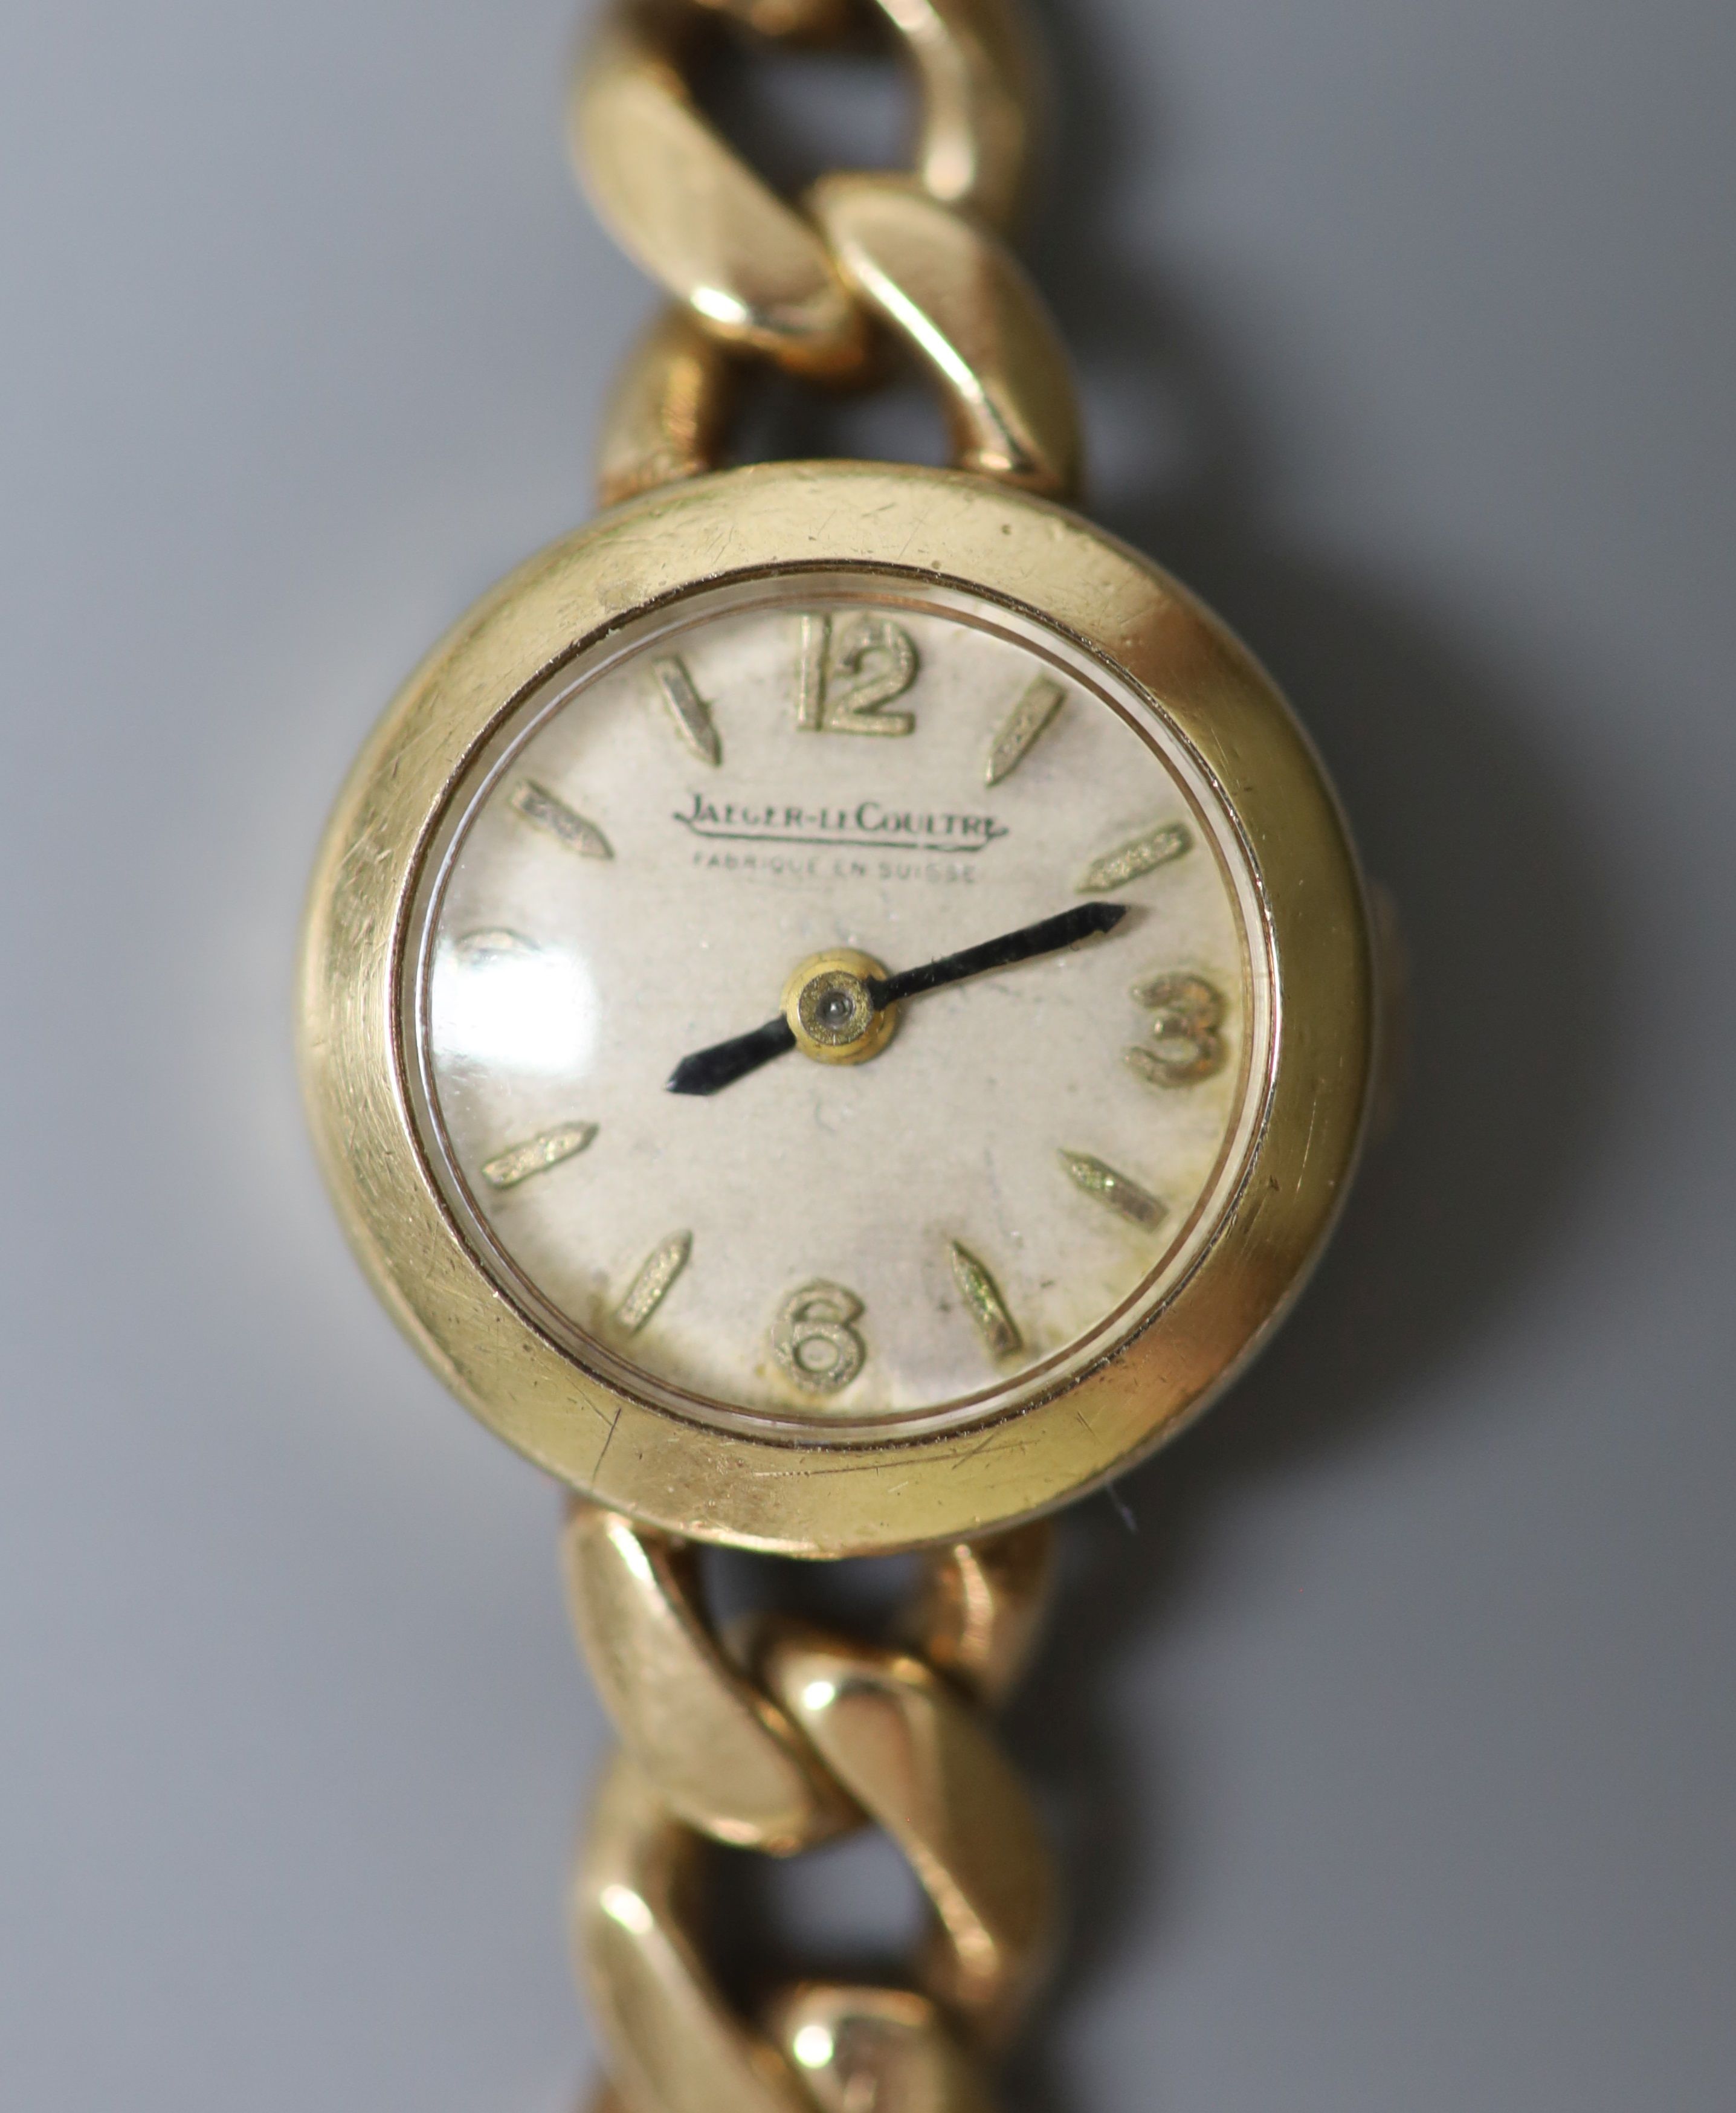 A lady's 1960's 9ct gold Jaeger LeCoultre manual back wind wrist watch, on associated 9ct gold curb link bracelet, overall 16.2cm, gross weight 19.2 grams, with Jager LeCoultre box